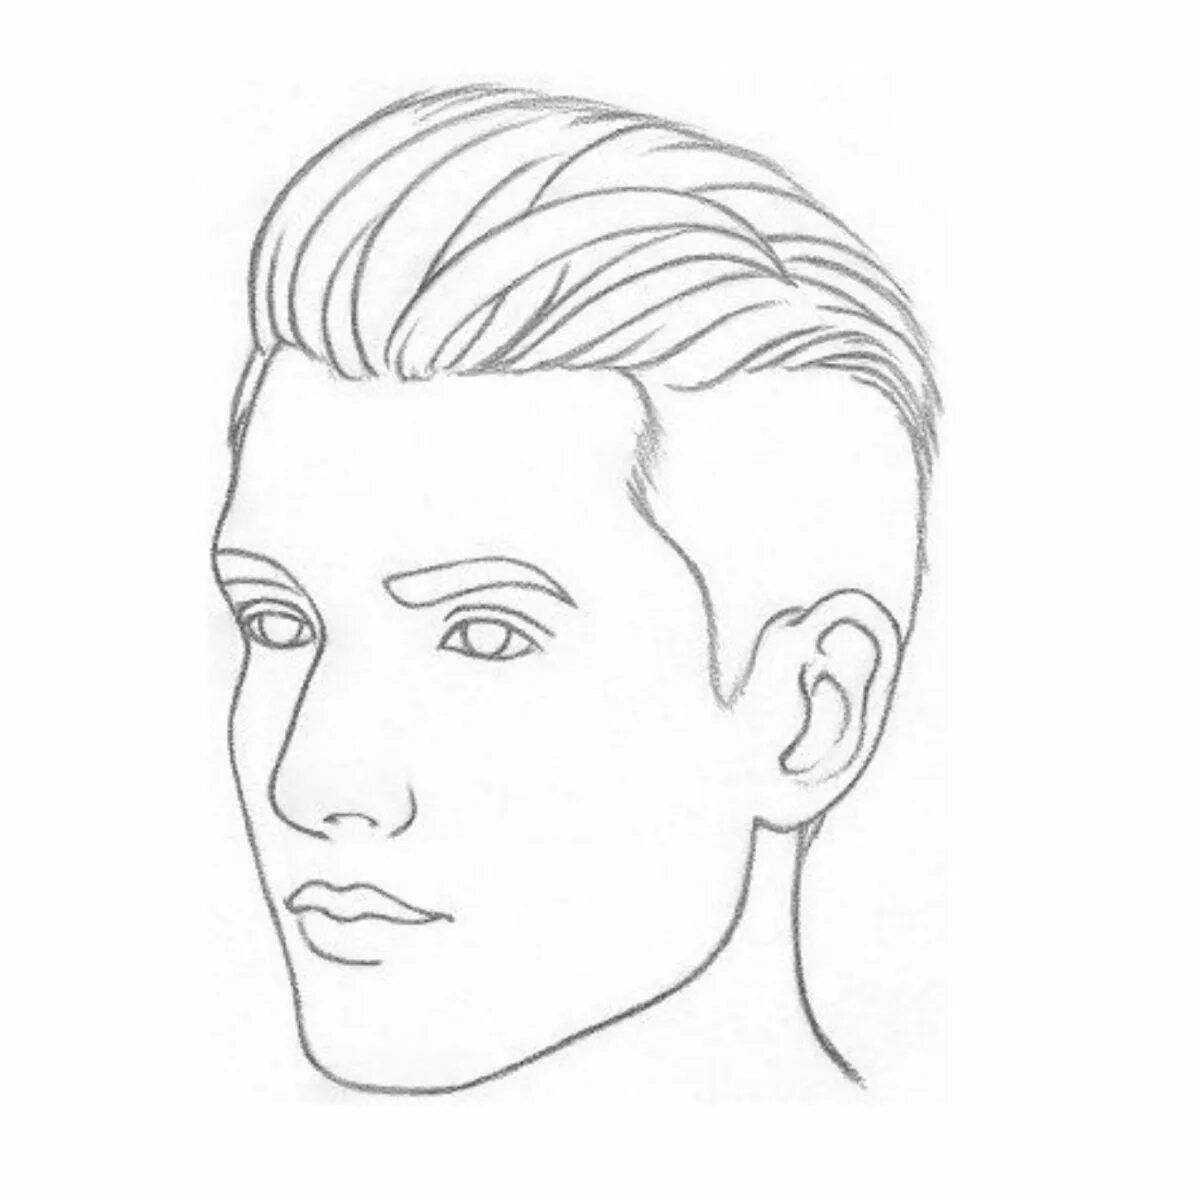 Coloring book of a glamorous male face